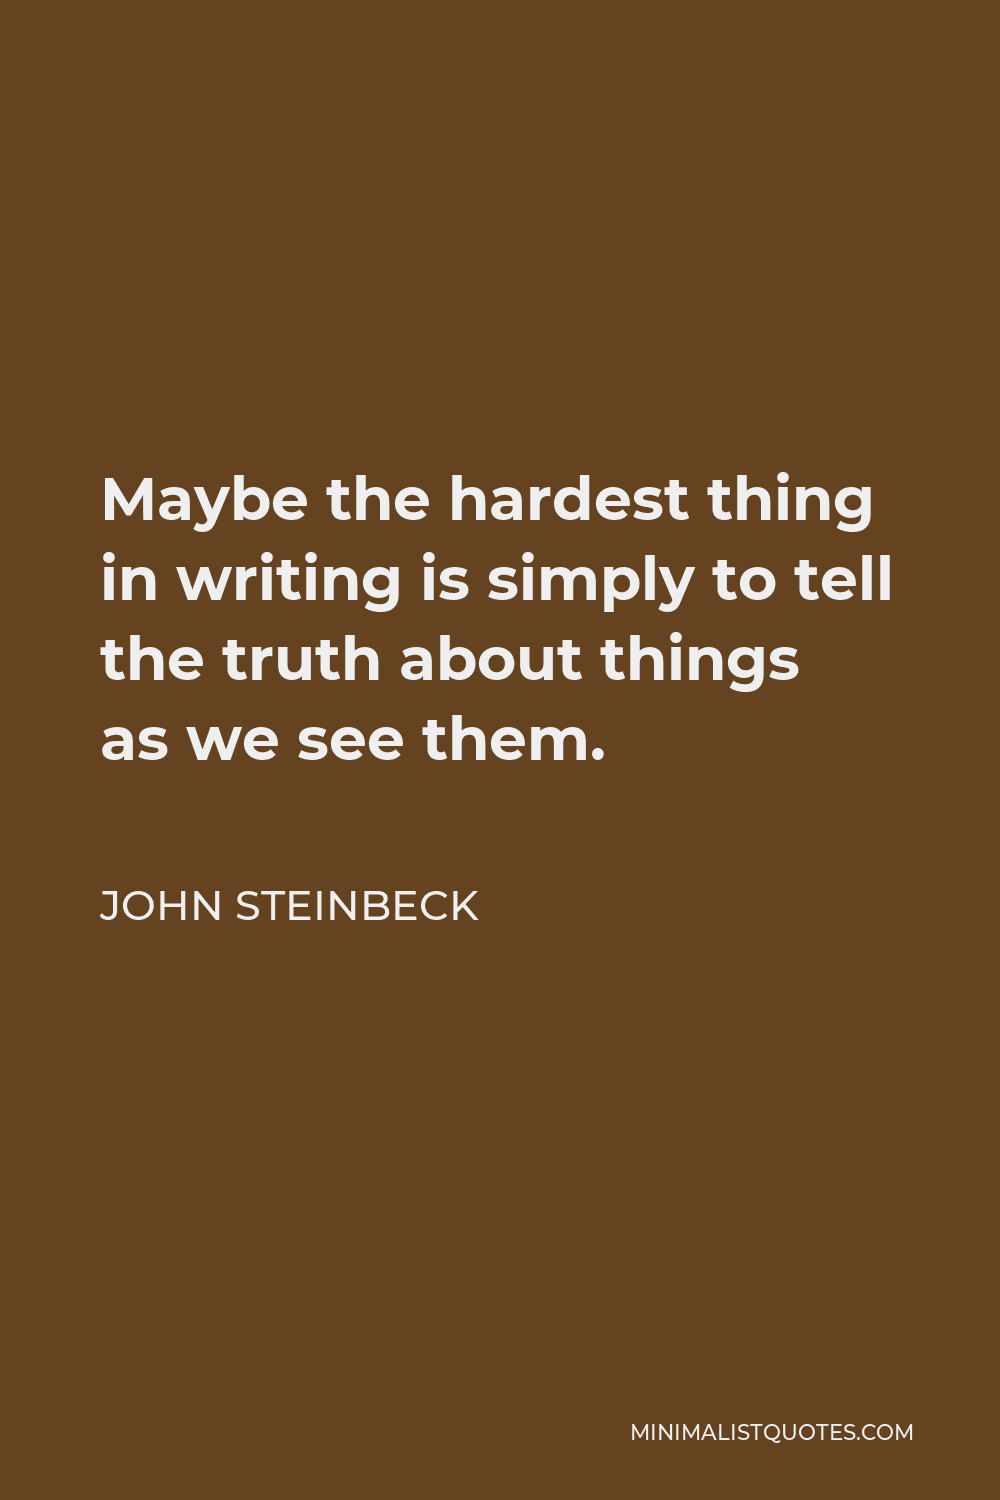 John Steinbeck Quote - Maybe the hardest thing in writing is simply to tell the truth about things as we see them.